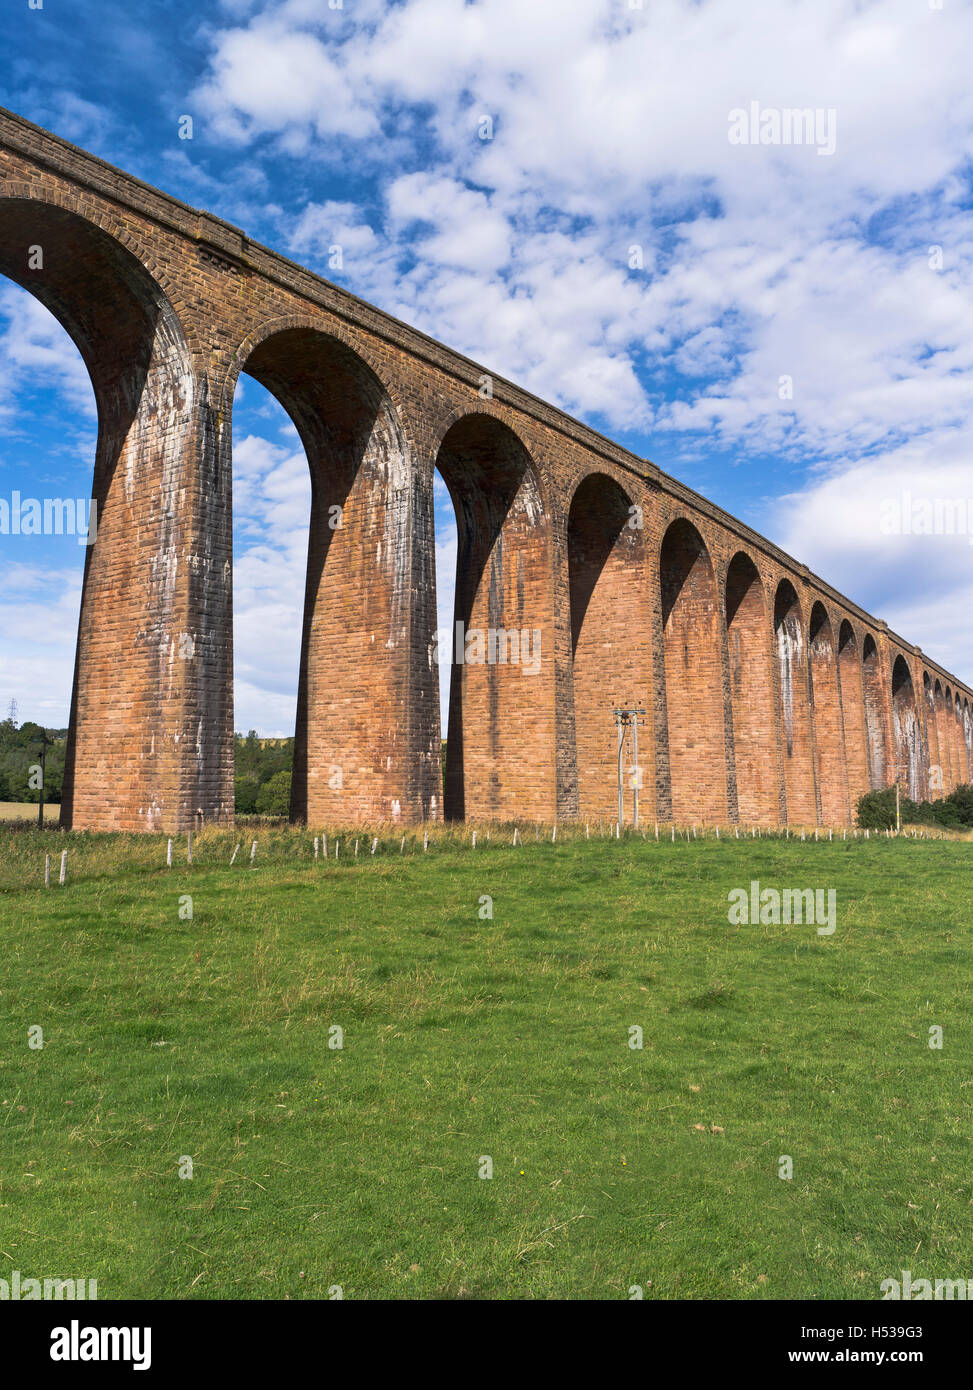 dh Nairn Railway Viaduct NAIRN VALLEY INVERNESS SHIRE culloden moor viaduct spanning the river nairn viaducts scotland daytime uk Stock Photo